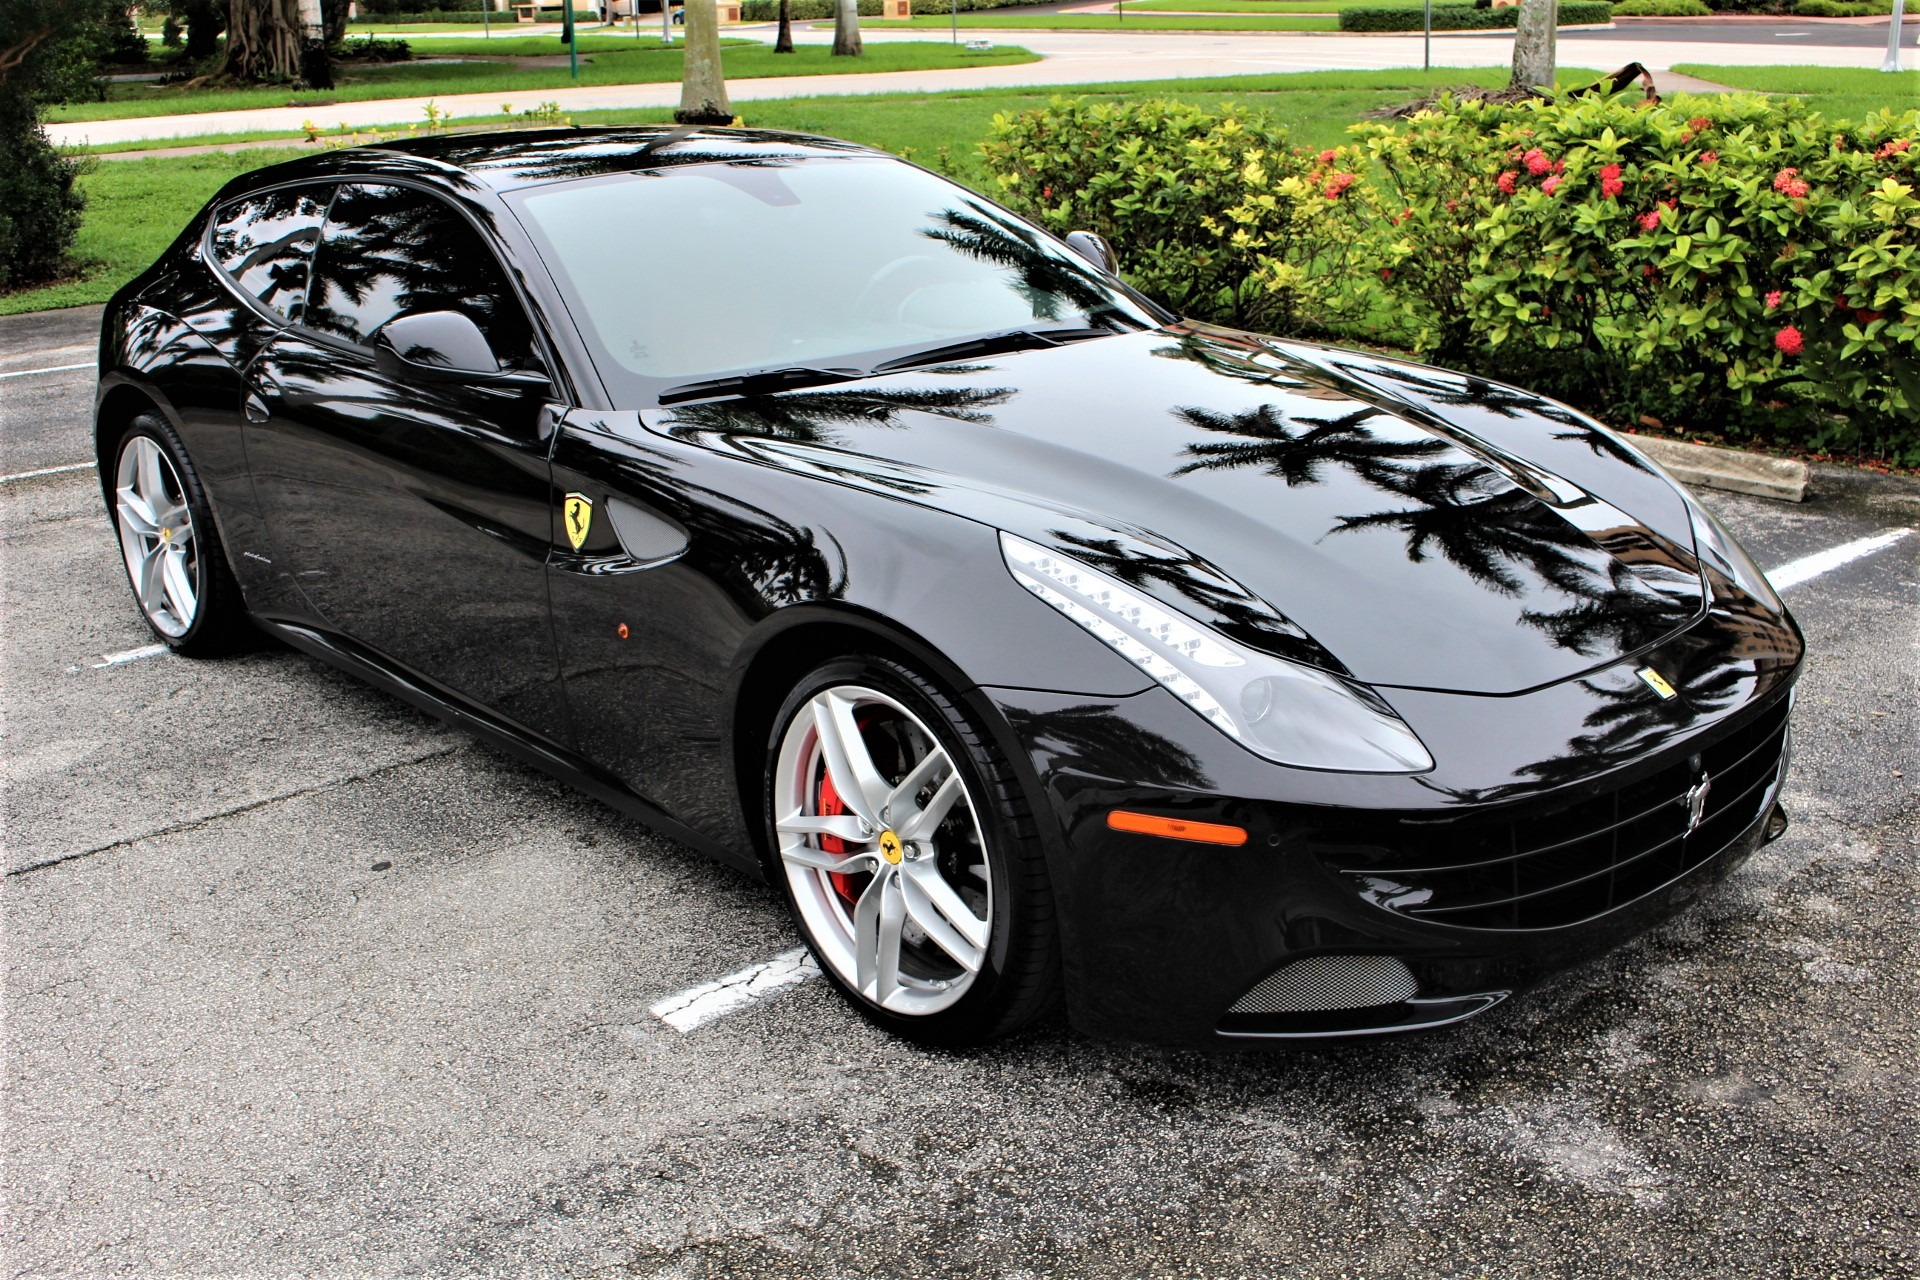 Used 2013 Ferrari FF for sale Sold at The Gables Sports Cars in Miami FL 33146 4